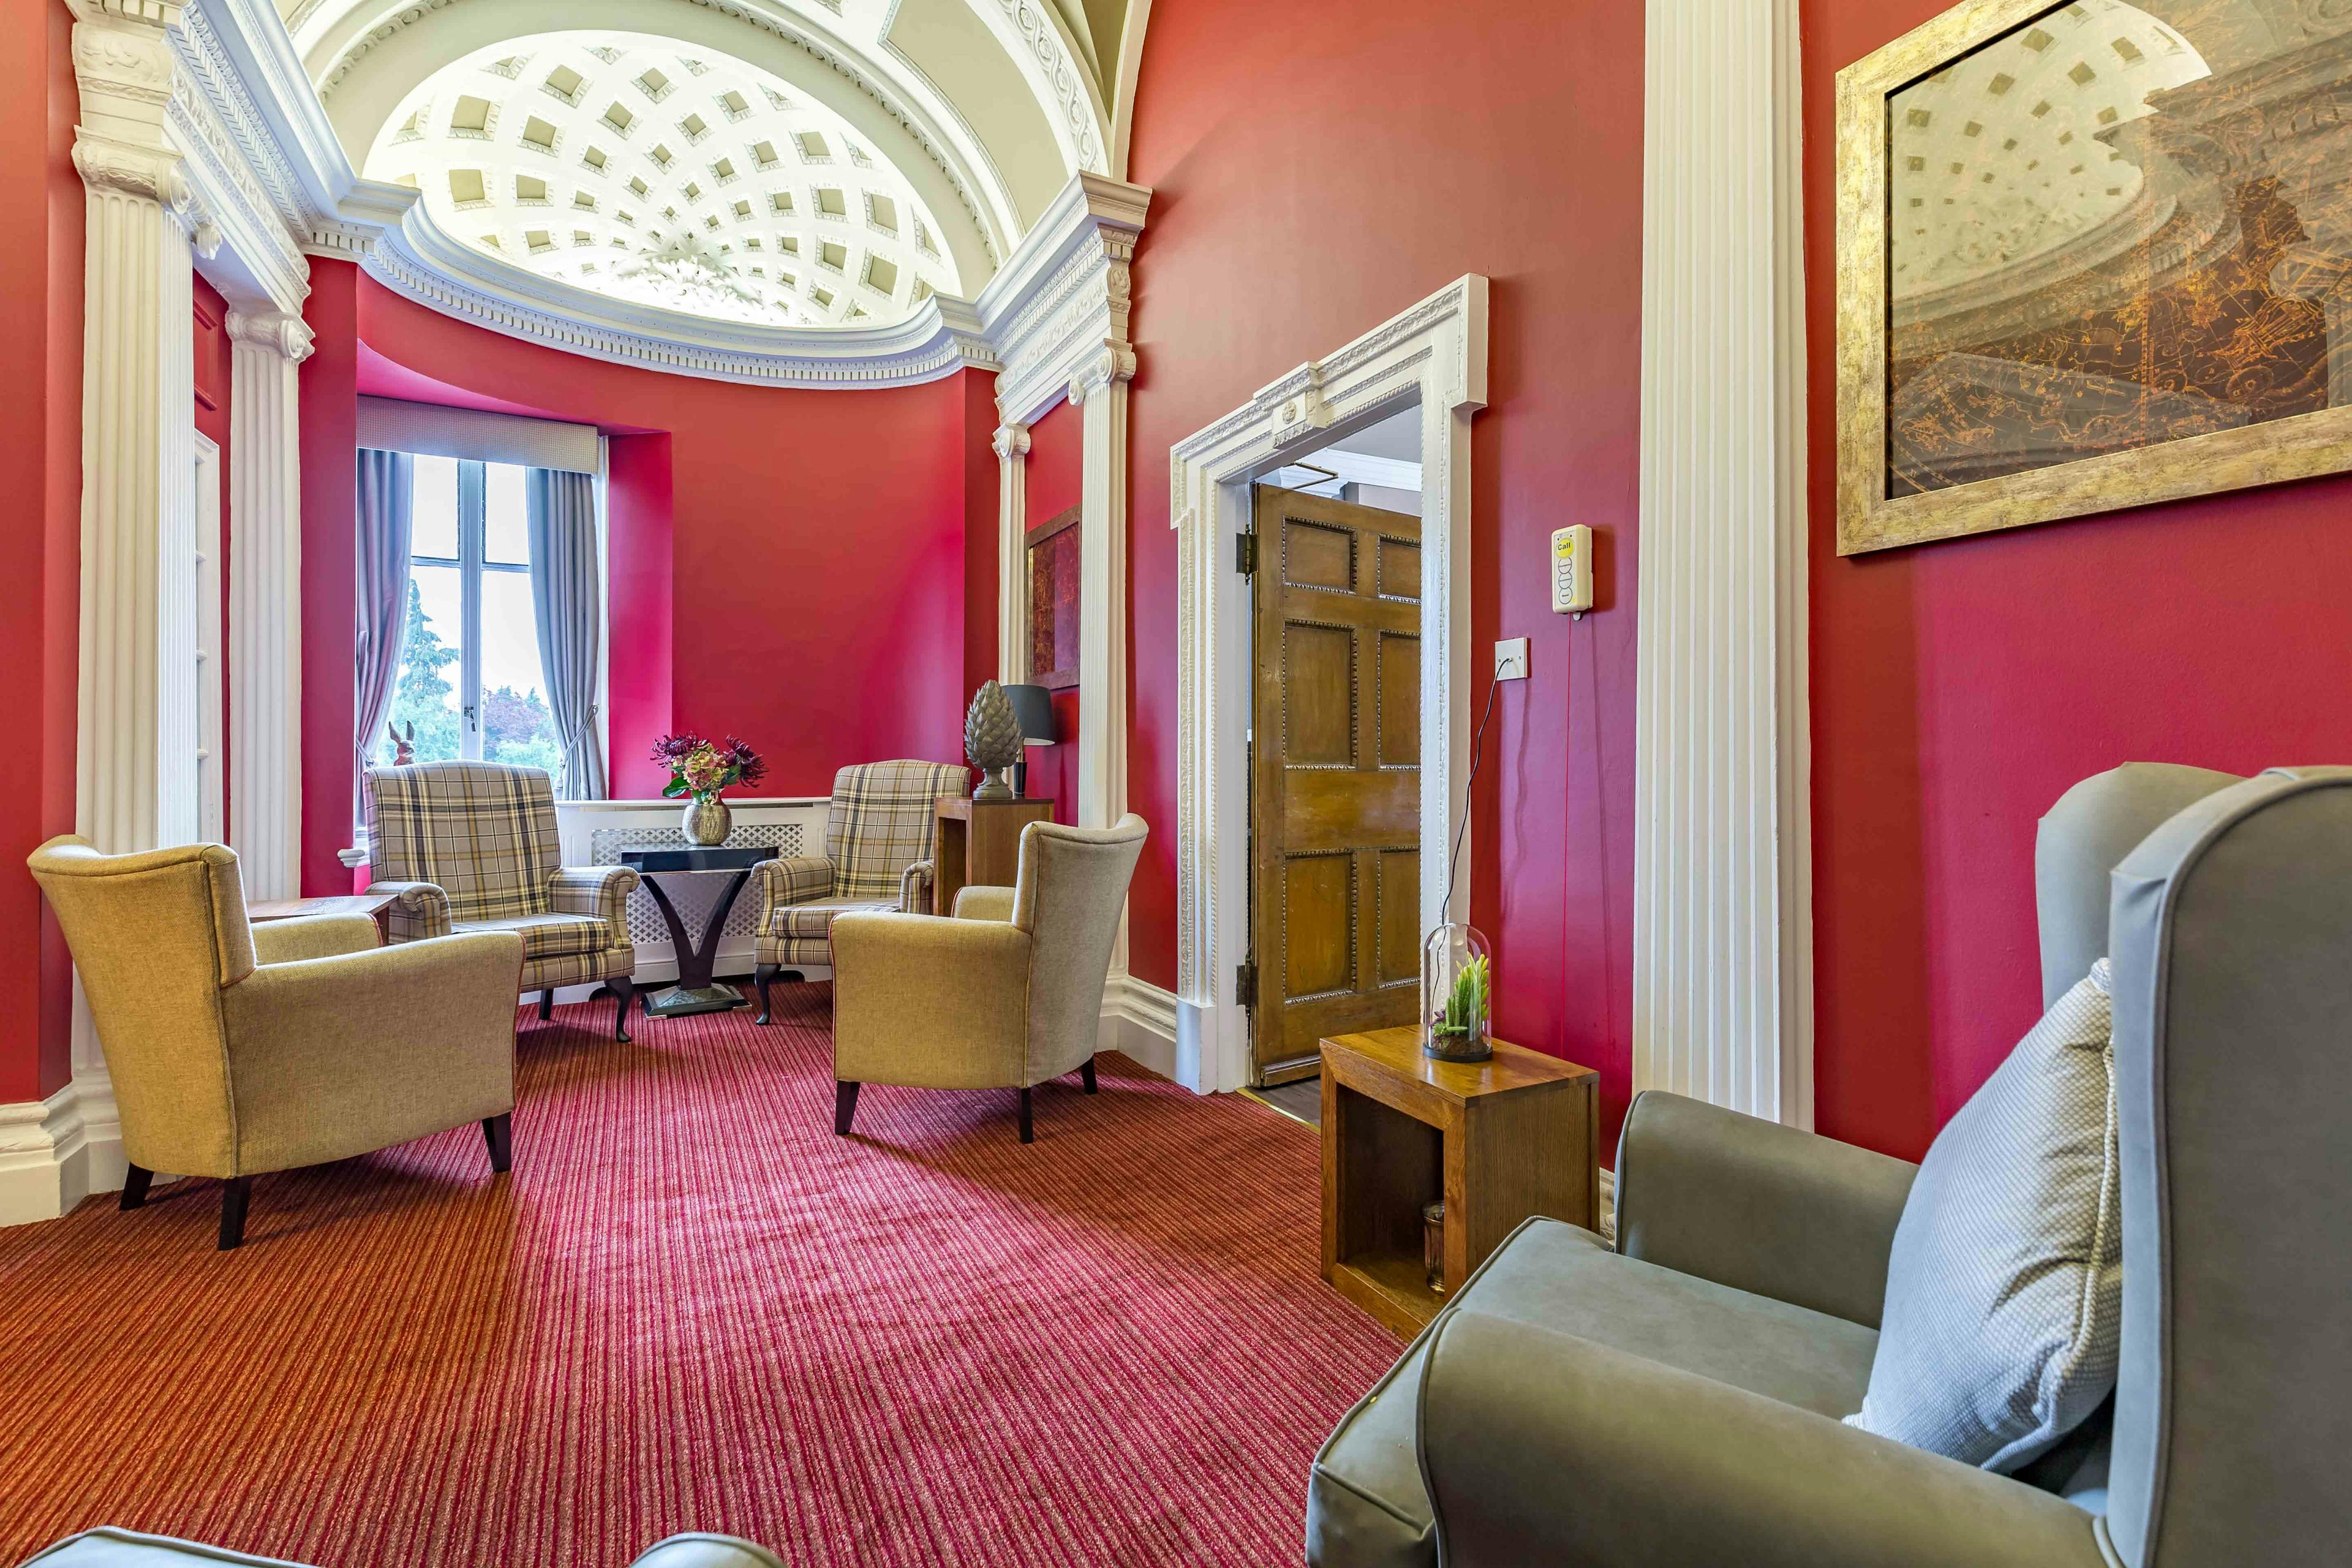 Communal Lounge at Southgate Beaumont Care Home in London, England